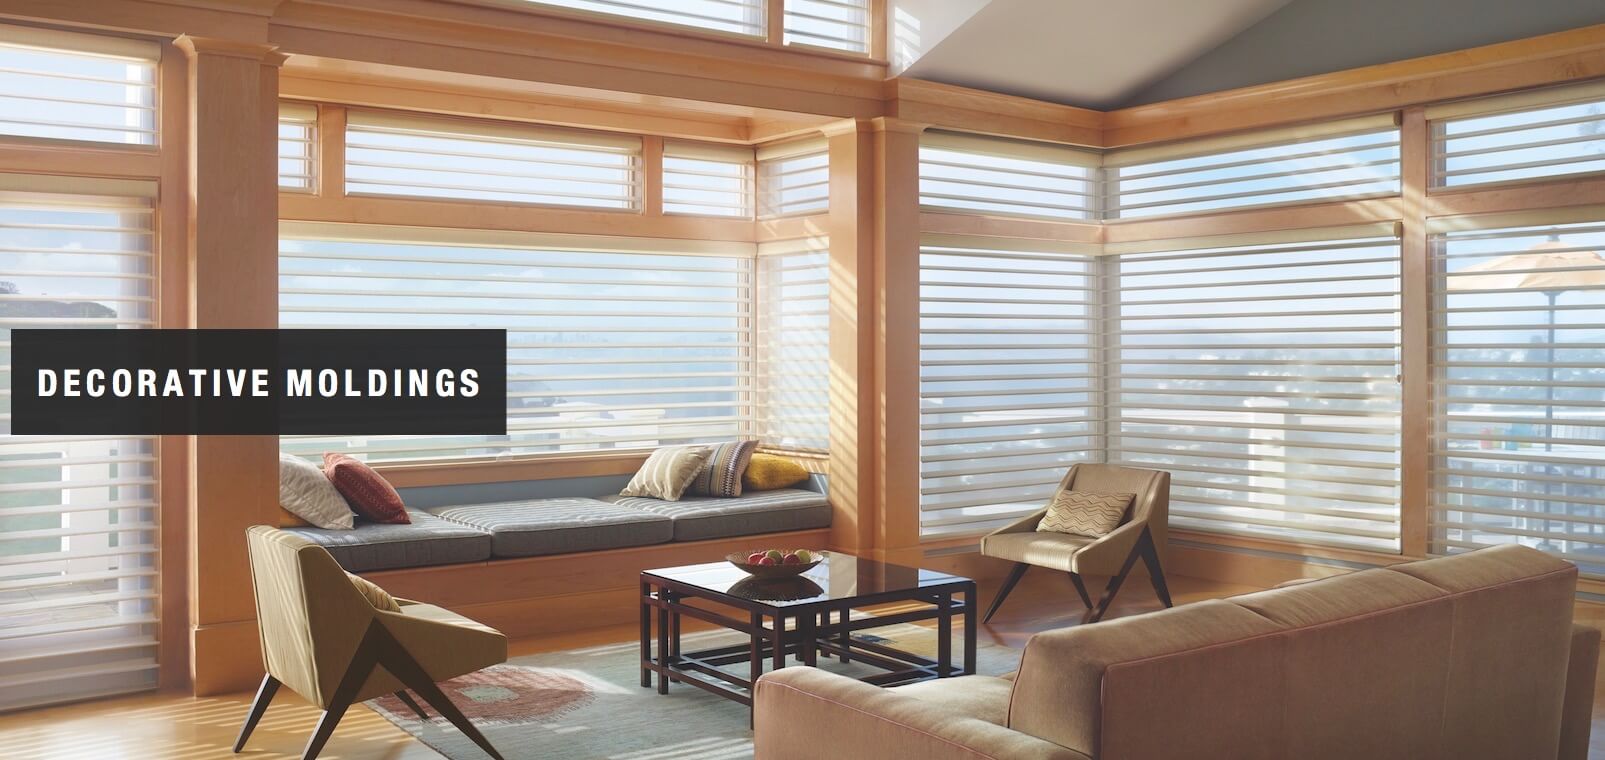 Wood window casings add warmth and interest. Shown with Silhouette® window shadings.